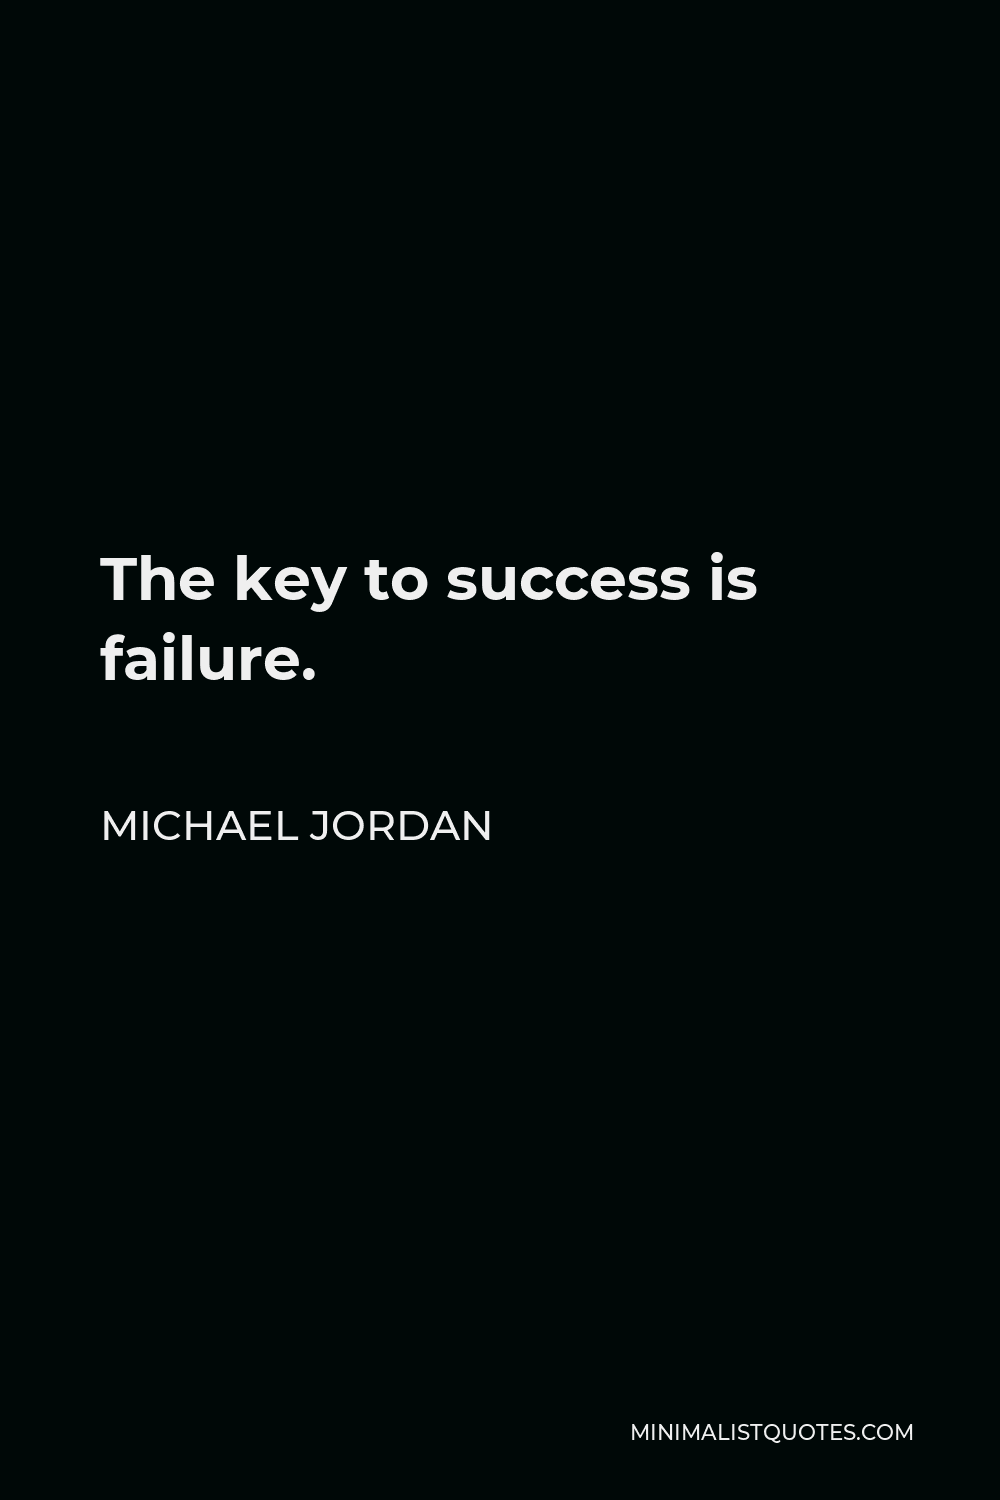 Michael Jordan Quote - The key to success is failure.